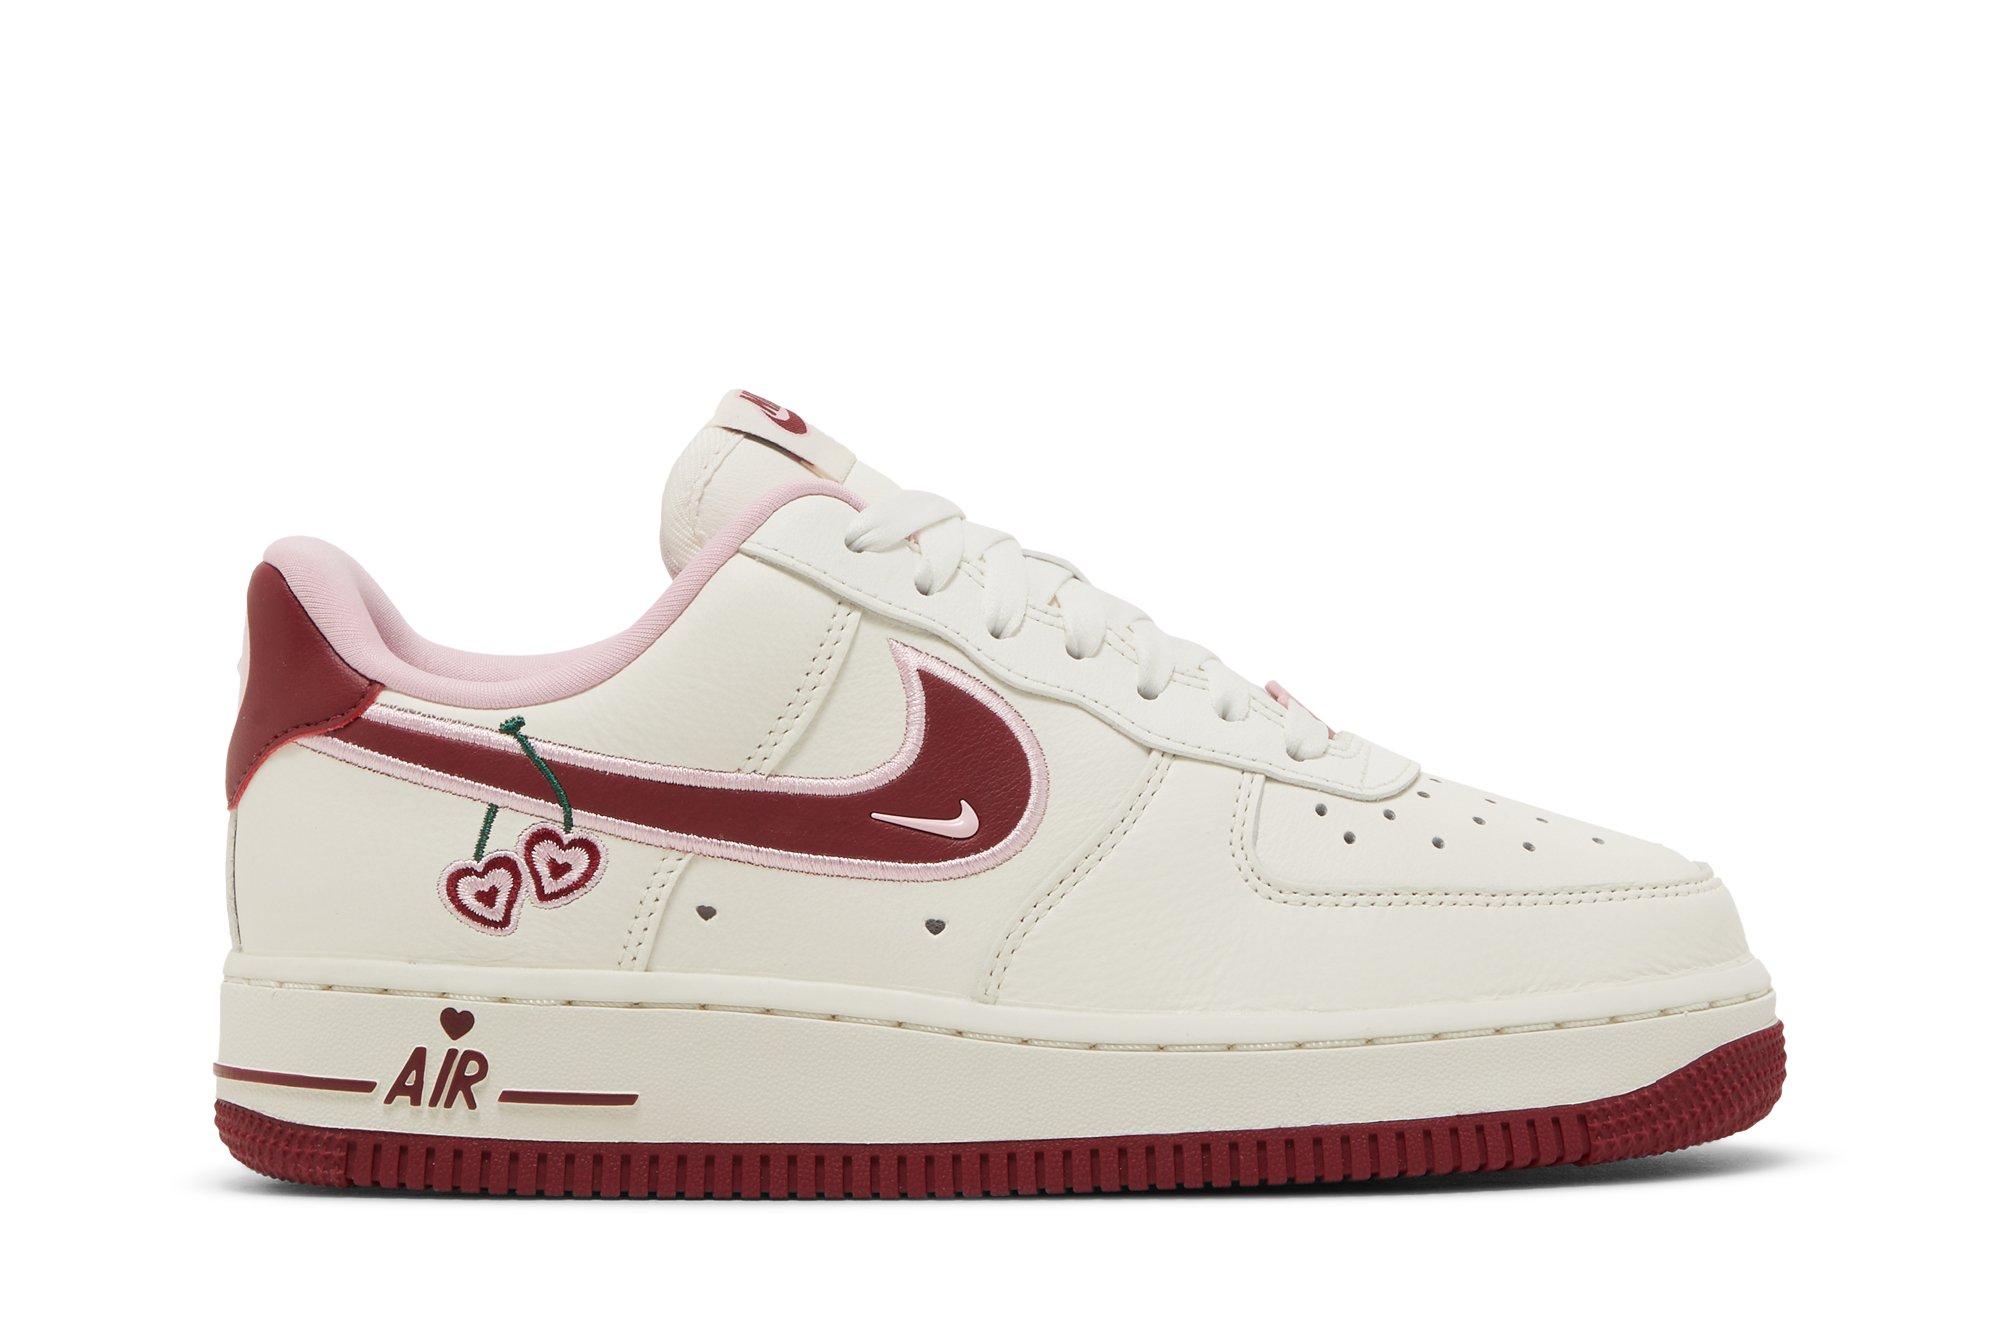 white air force 1 goat